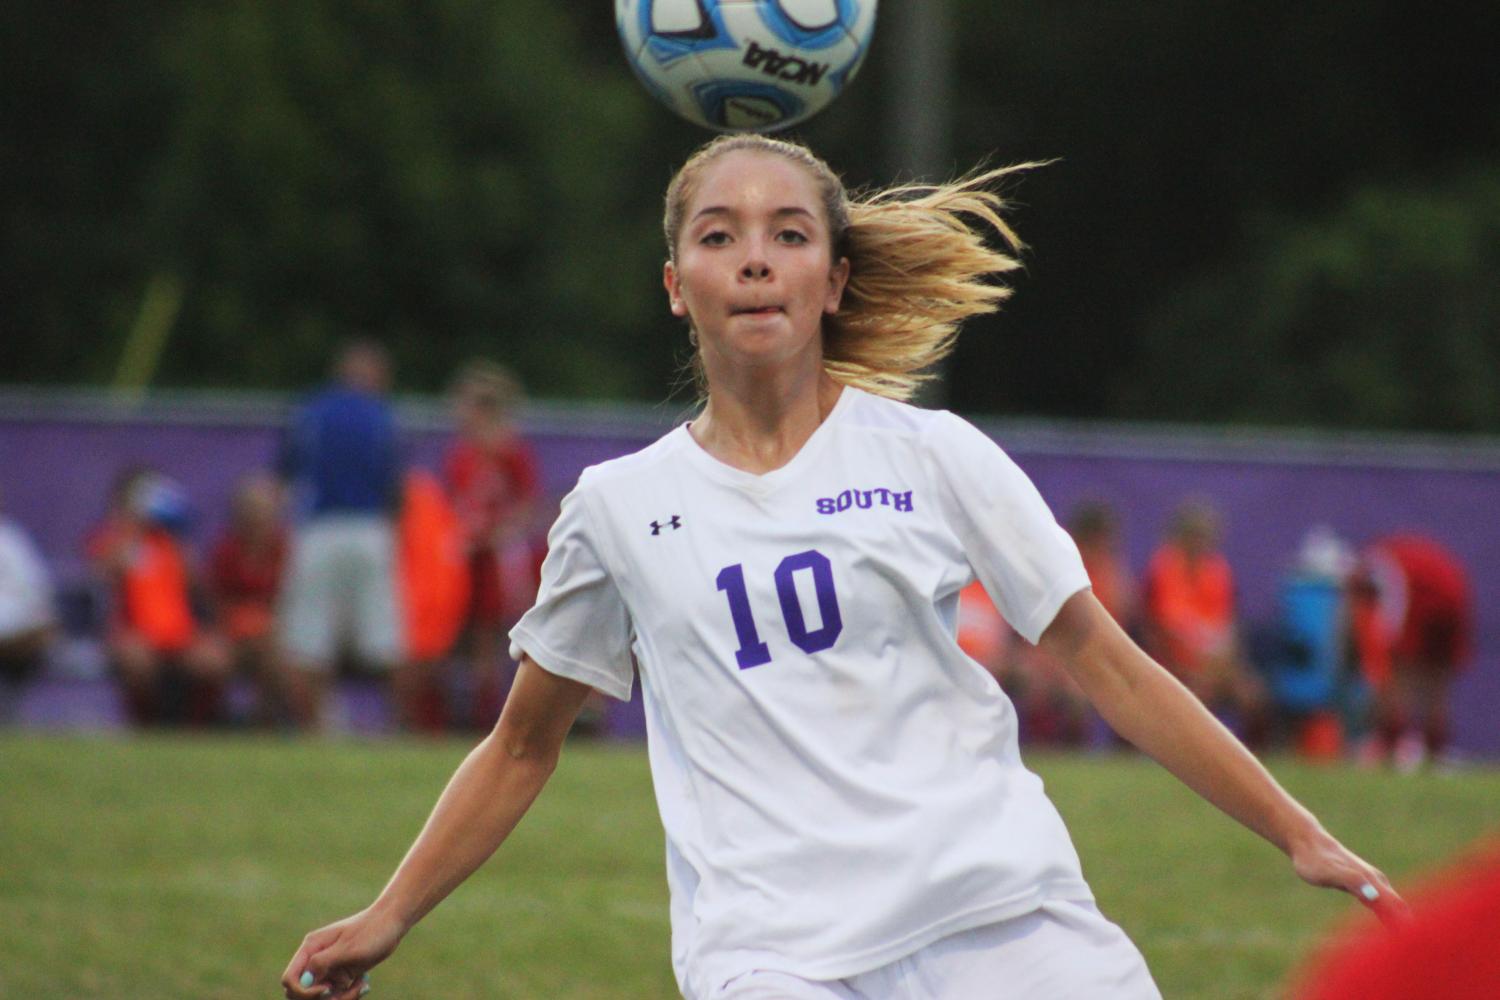 Panther soccer wins season opener in spectacular fashion